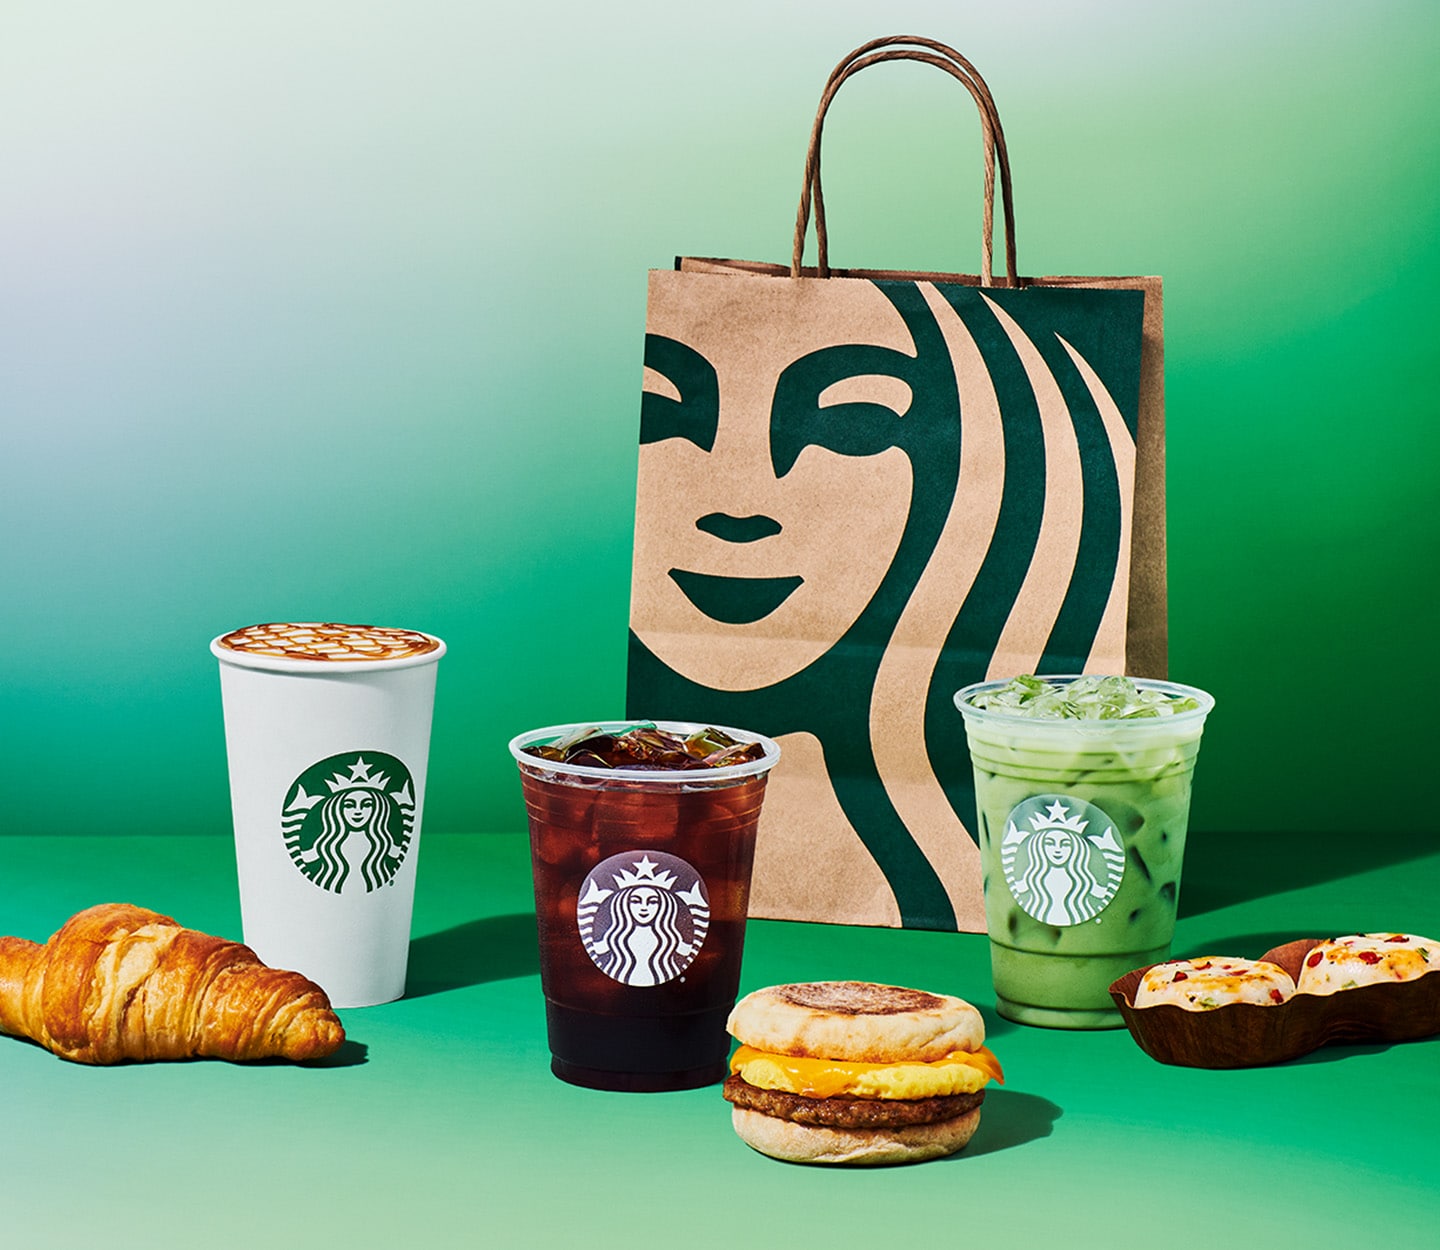 Starbucks drinks and breakfast food beside a Starbucks bag on a green background